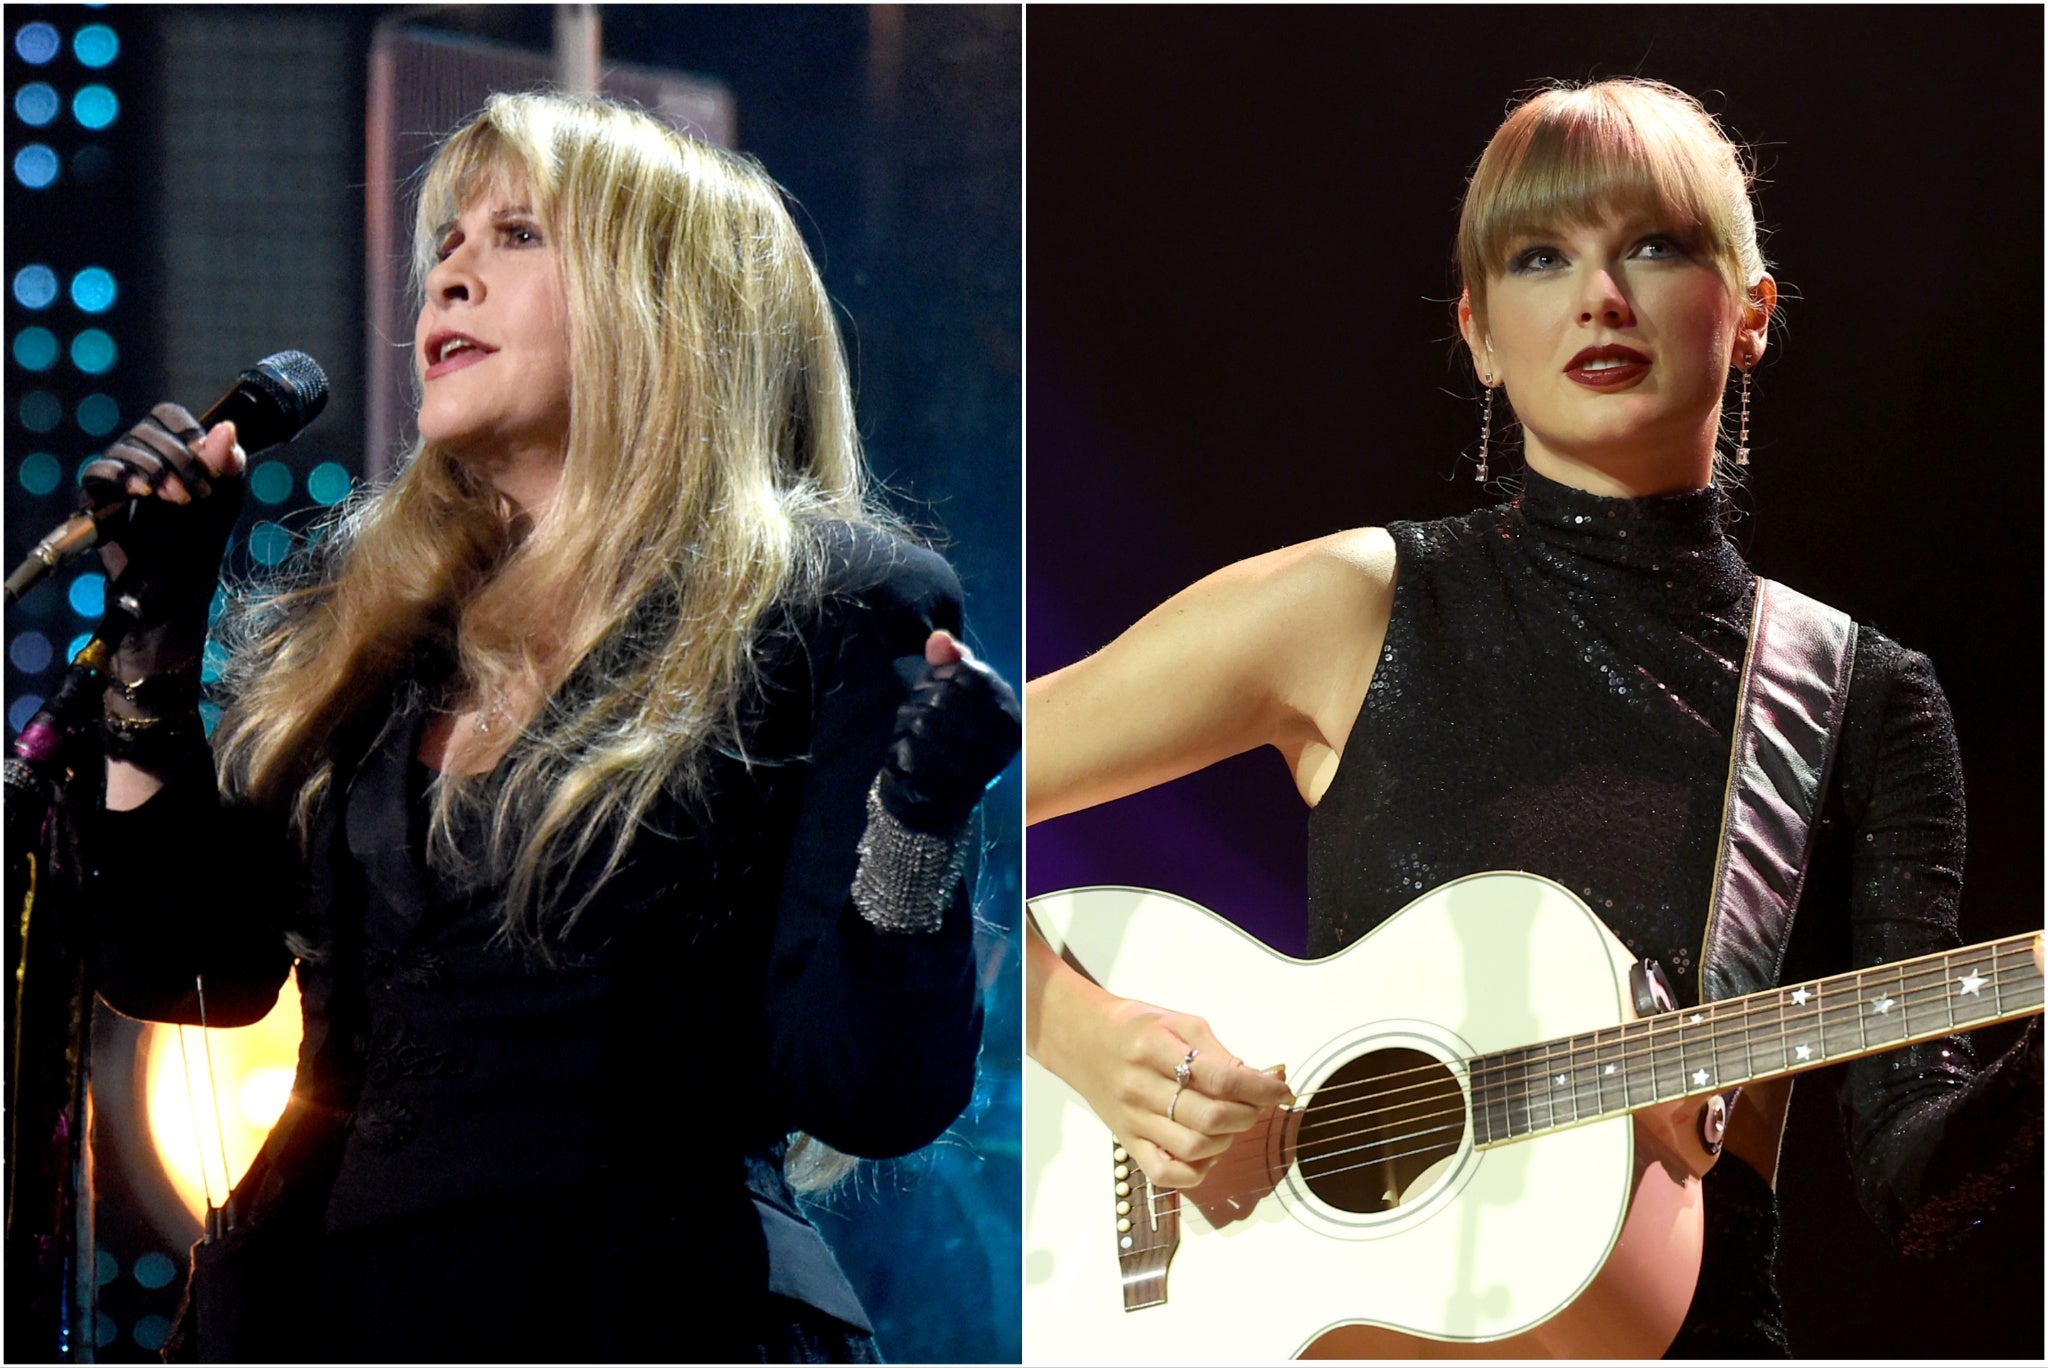 Stevie Nicks wrote a poem for Taylor Swift’s album, The Tortured Poets Department